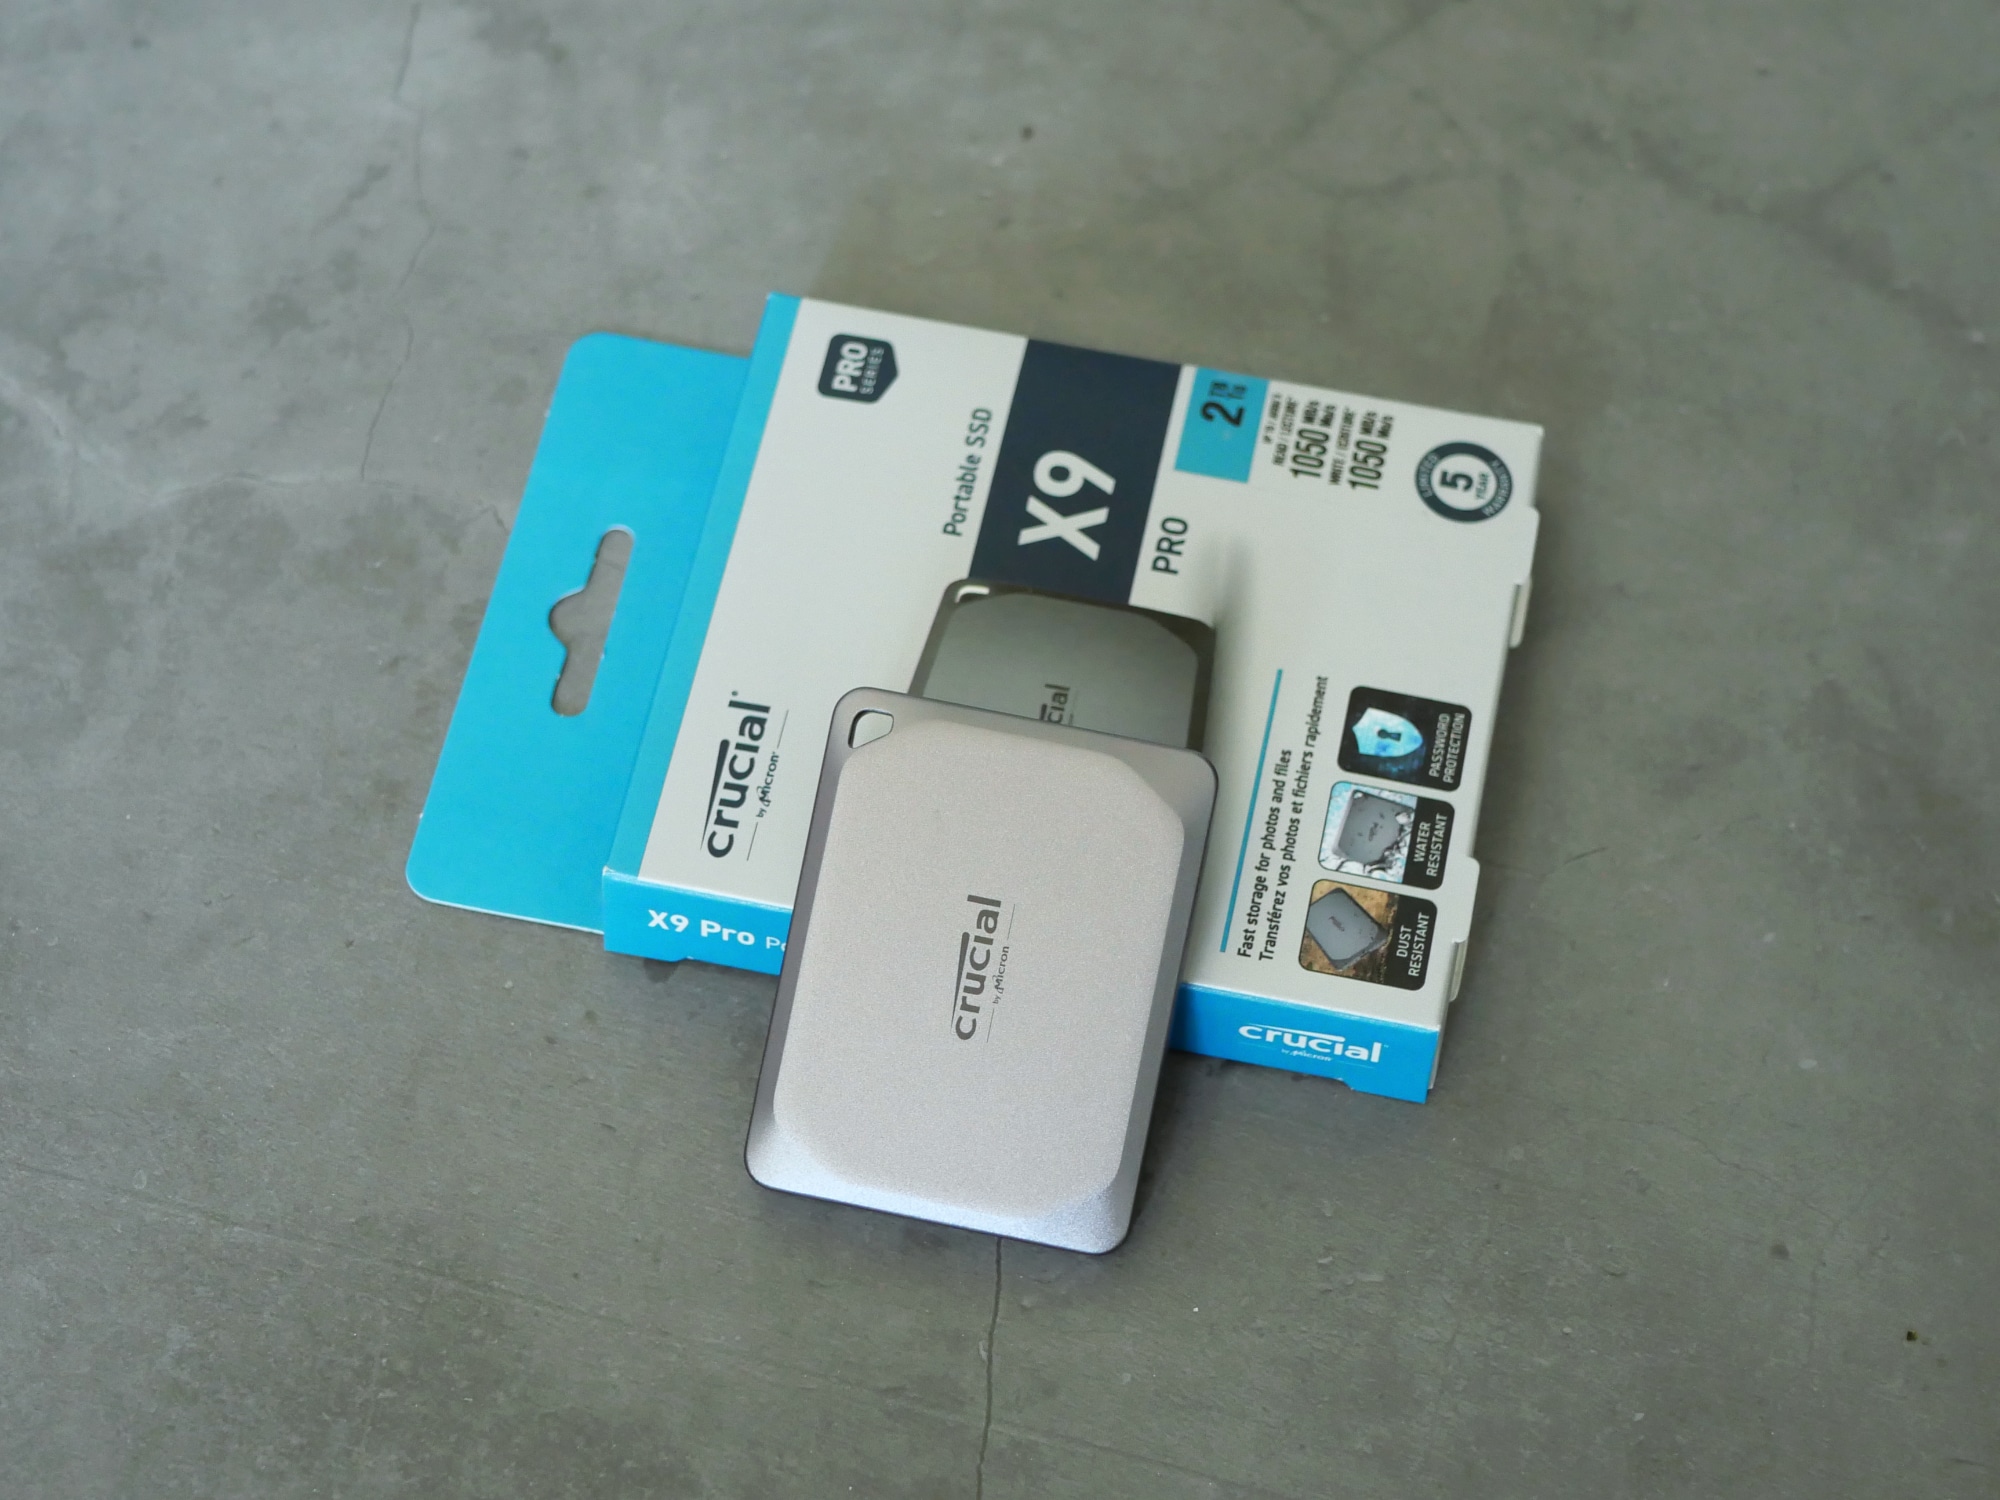 Crucial X9 Pro 2TB Portable SSD, CT2000X9PROSSD9